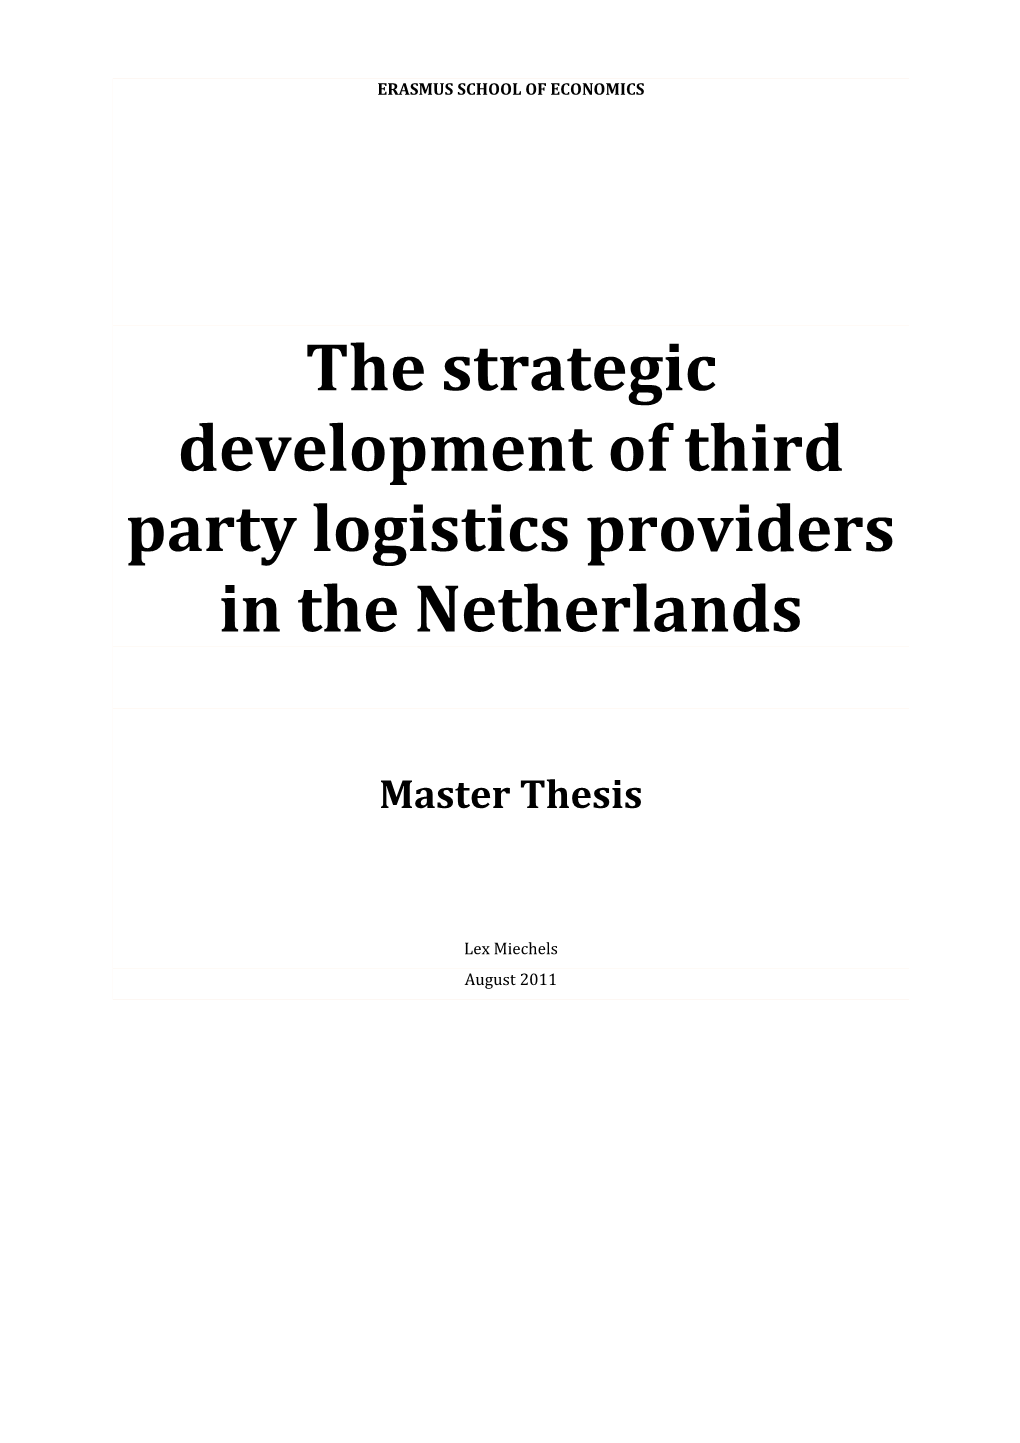 The Strategic Development of Third Party Logistics Providers in the Netherlands